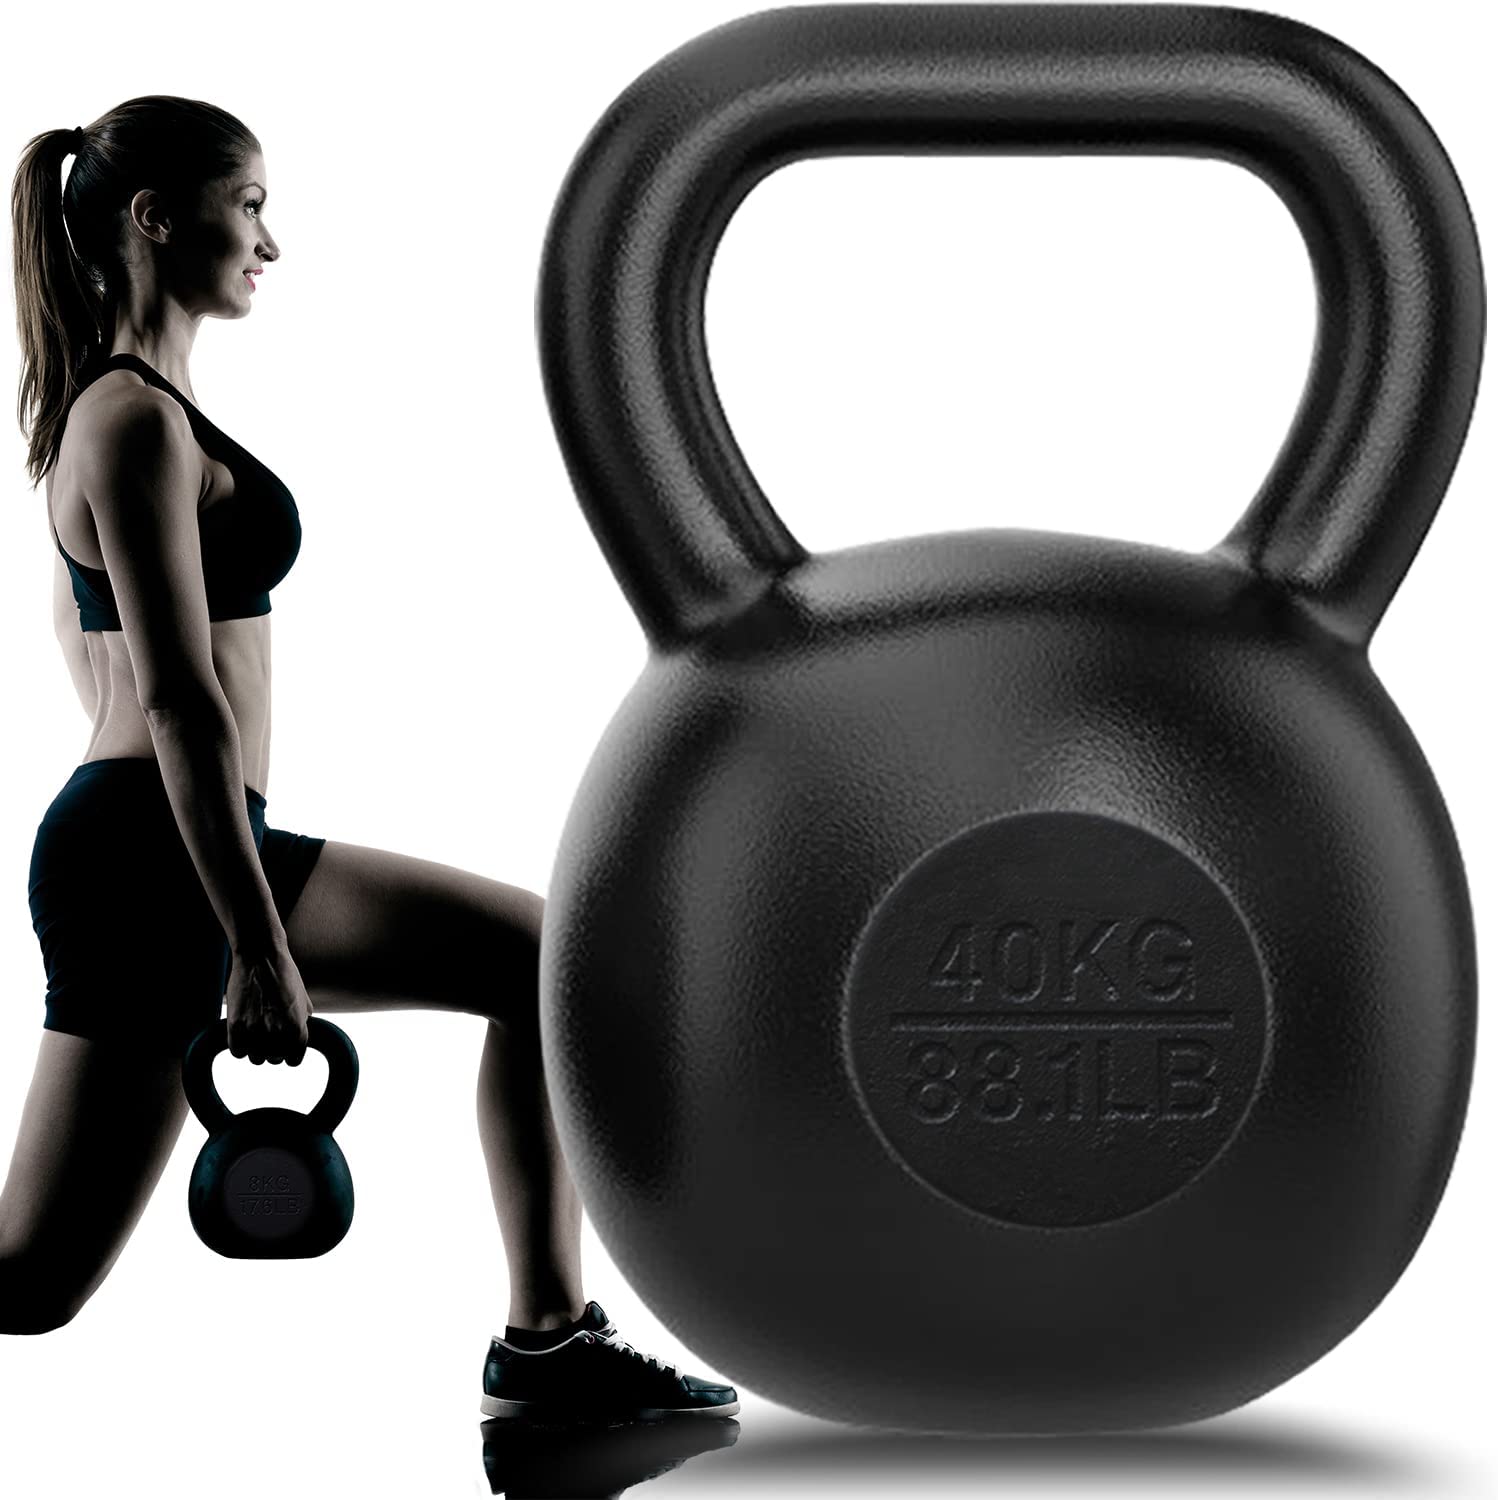 4kg to 40kg, 4kg increment Kettlebell - Weights With Rack